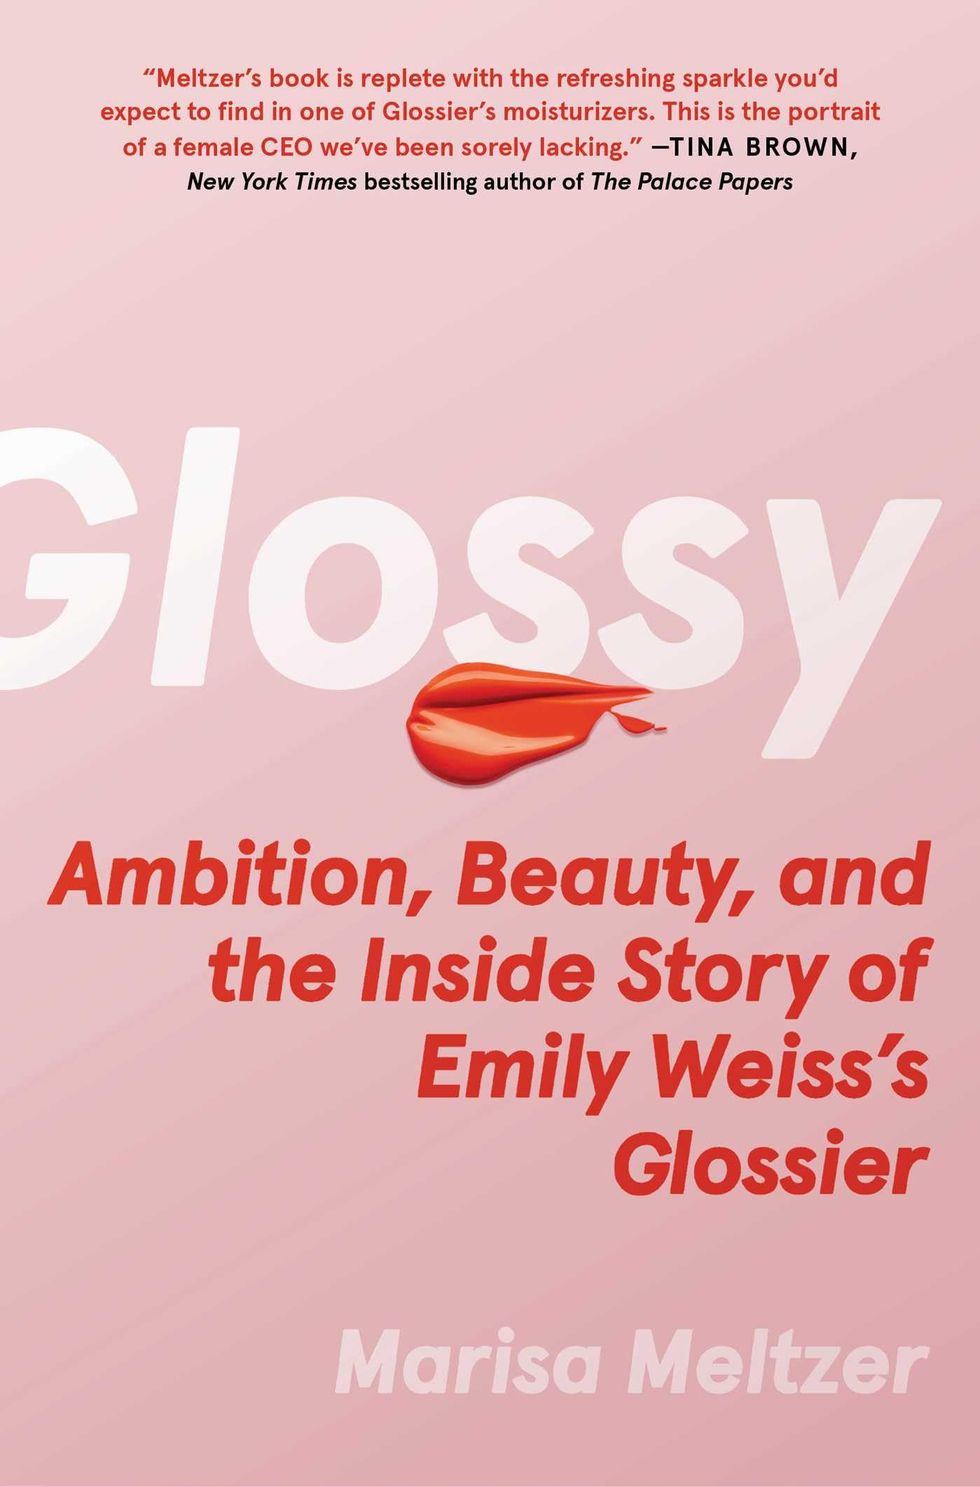 Glossy: Ambition, Beauty, and the Inside Story of Emily Weiss's Glossier